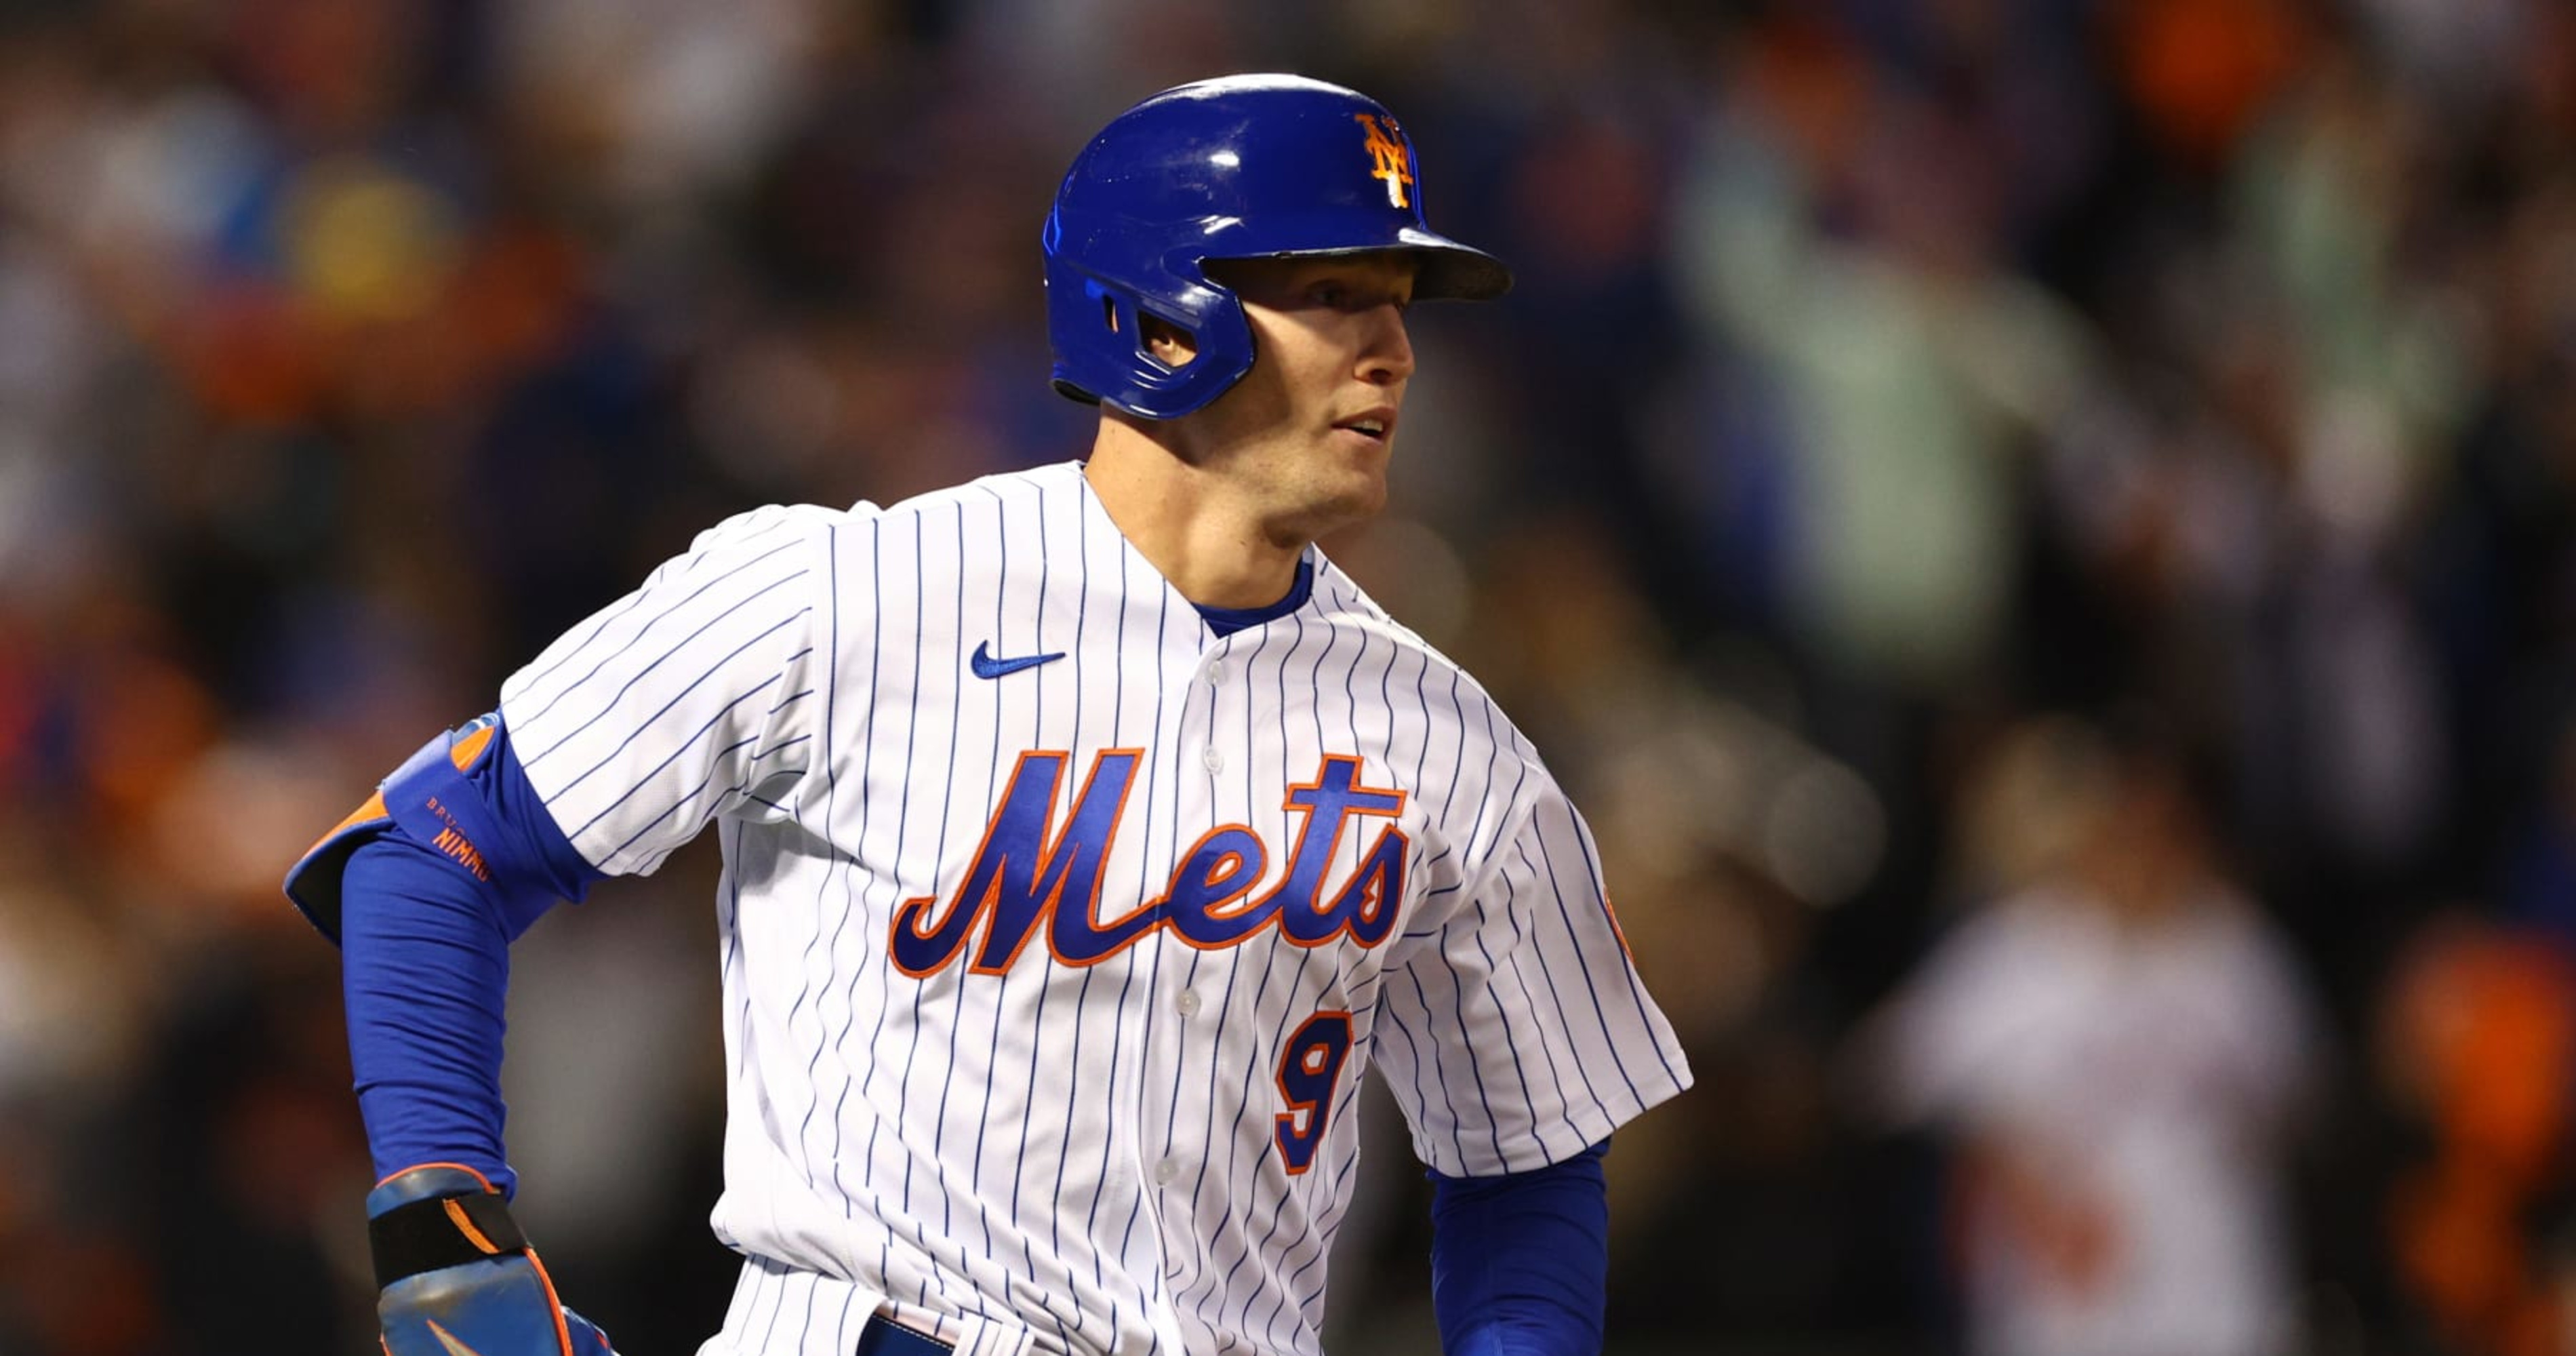 Nimmo rejoins Mets for Subway Series after 2-month absence for